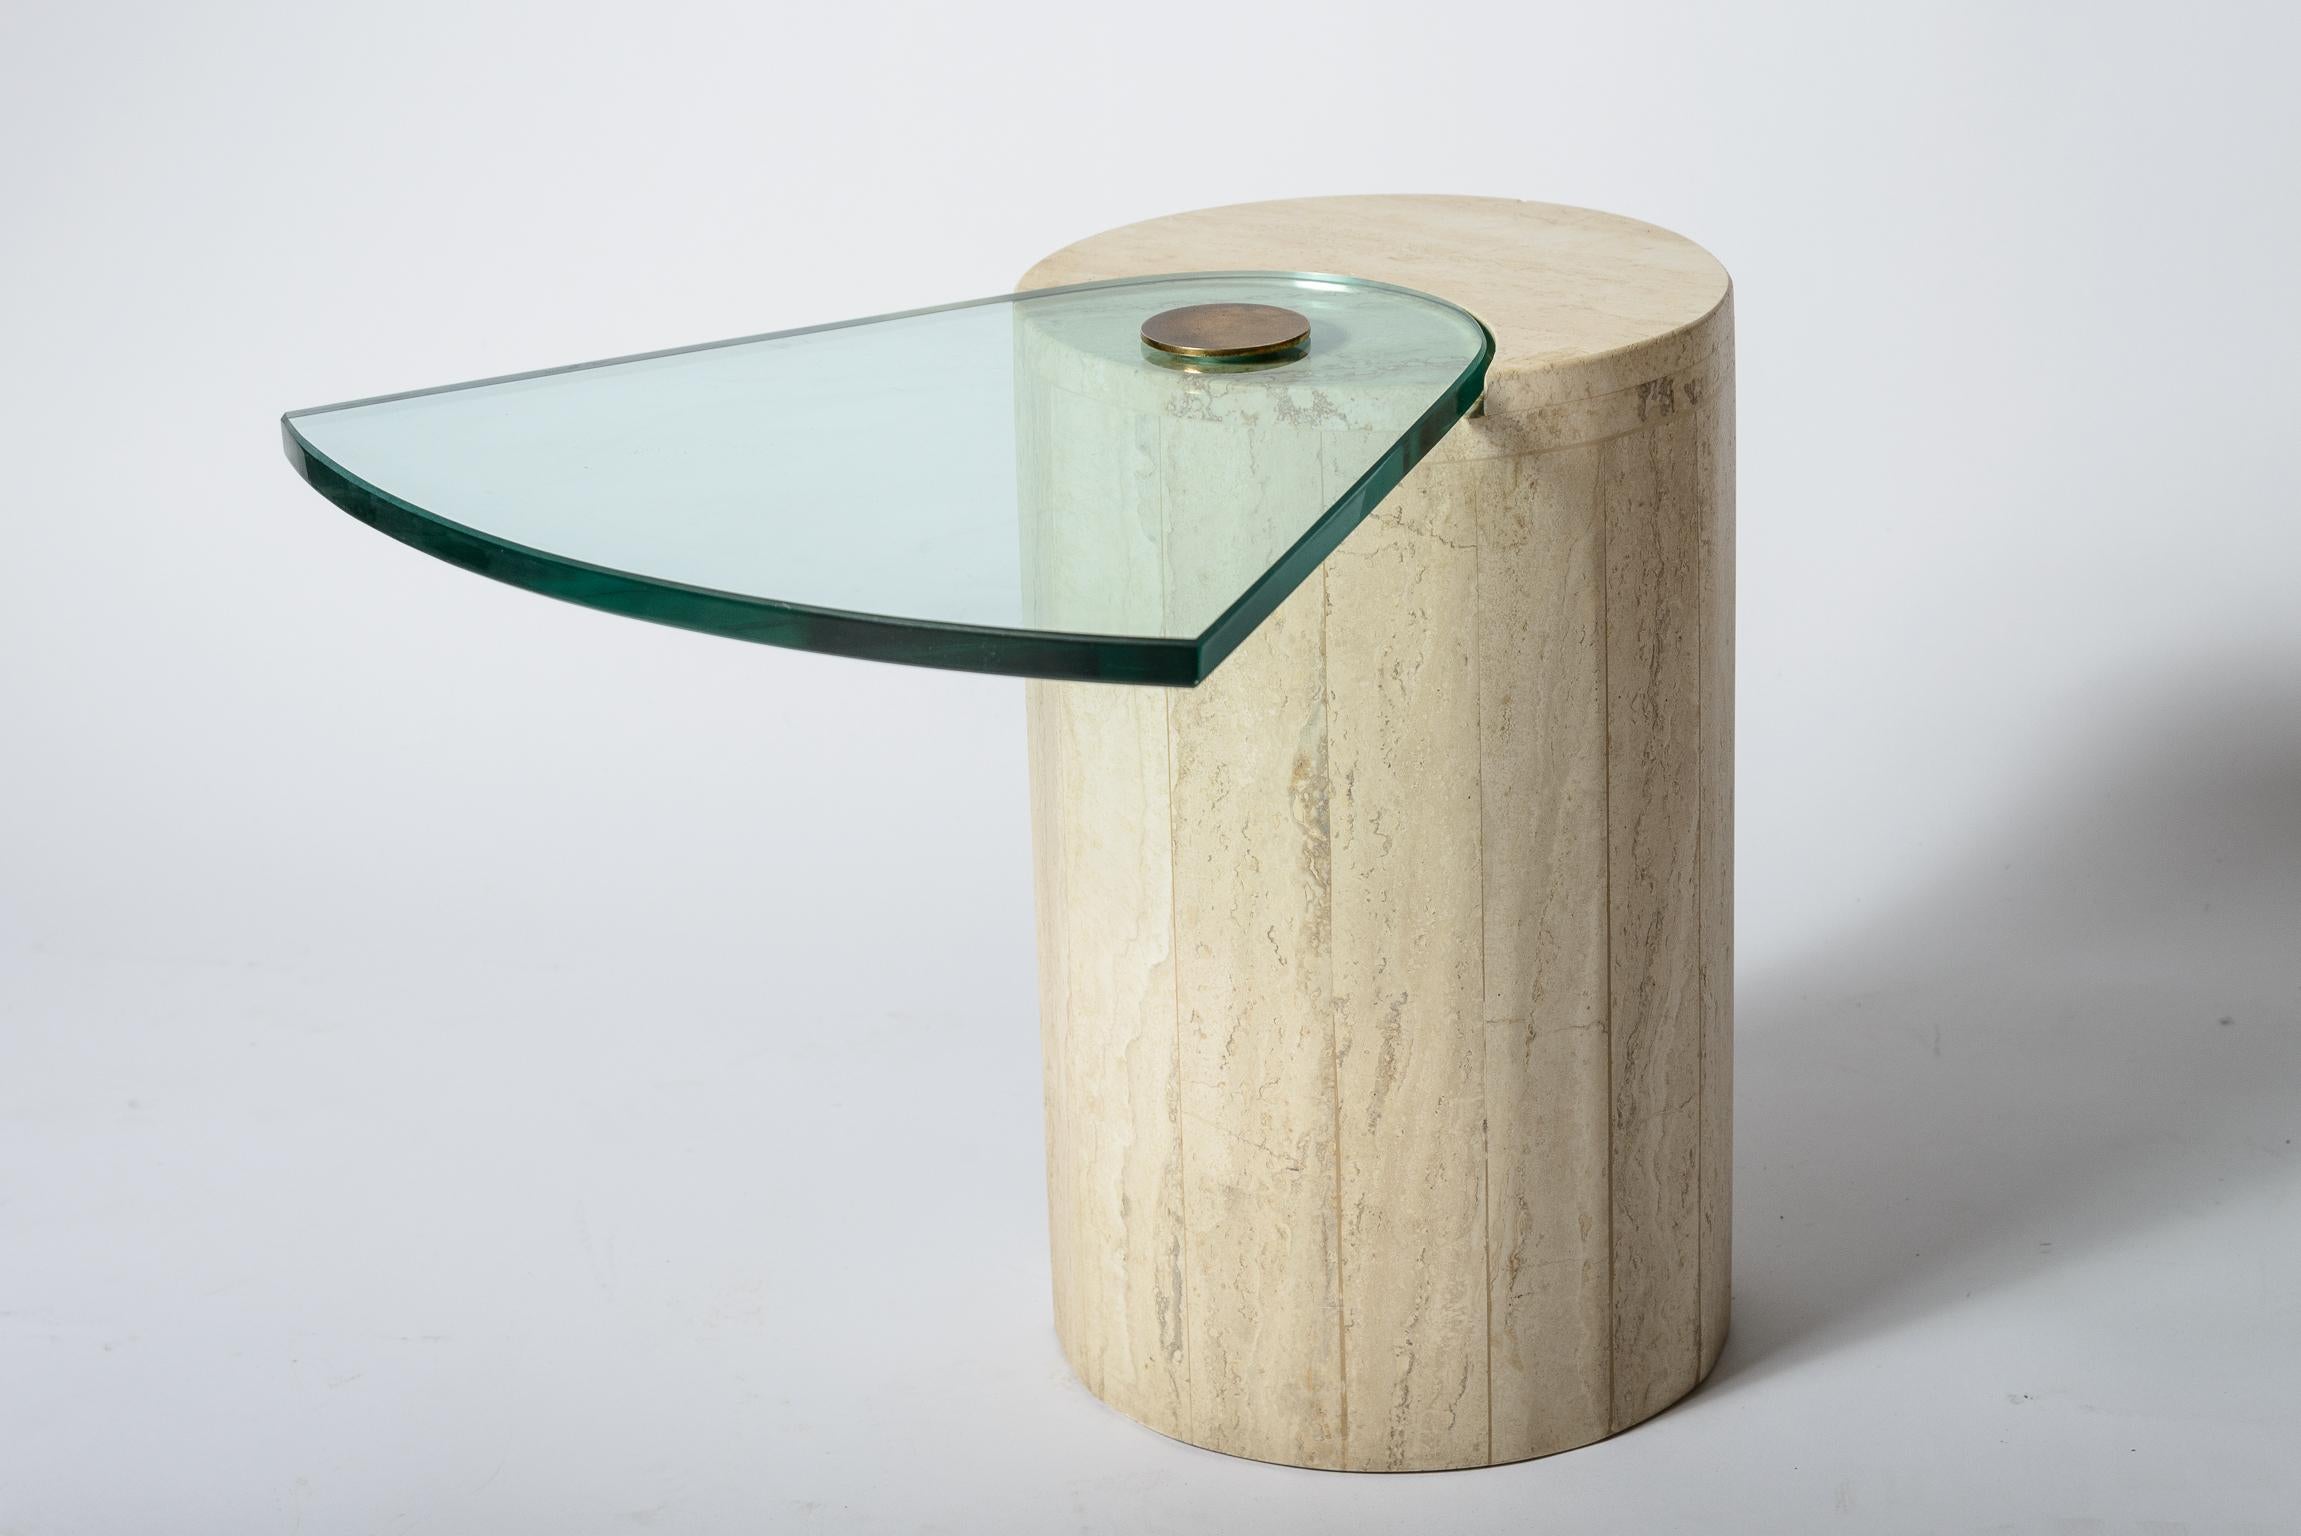 An Off Set sculpture table after a design by Karl Springer
Tessellated Stone Base
Original Glass Pie Shape top